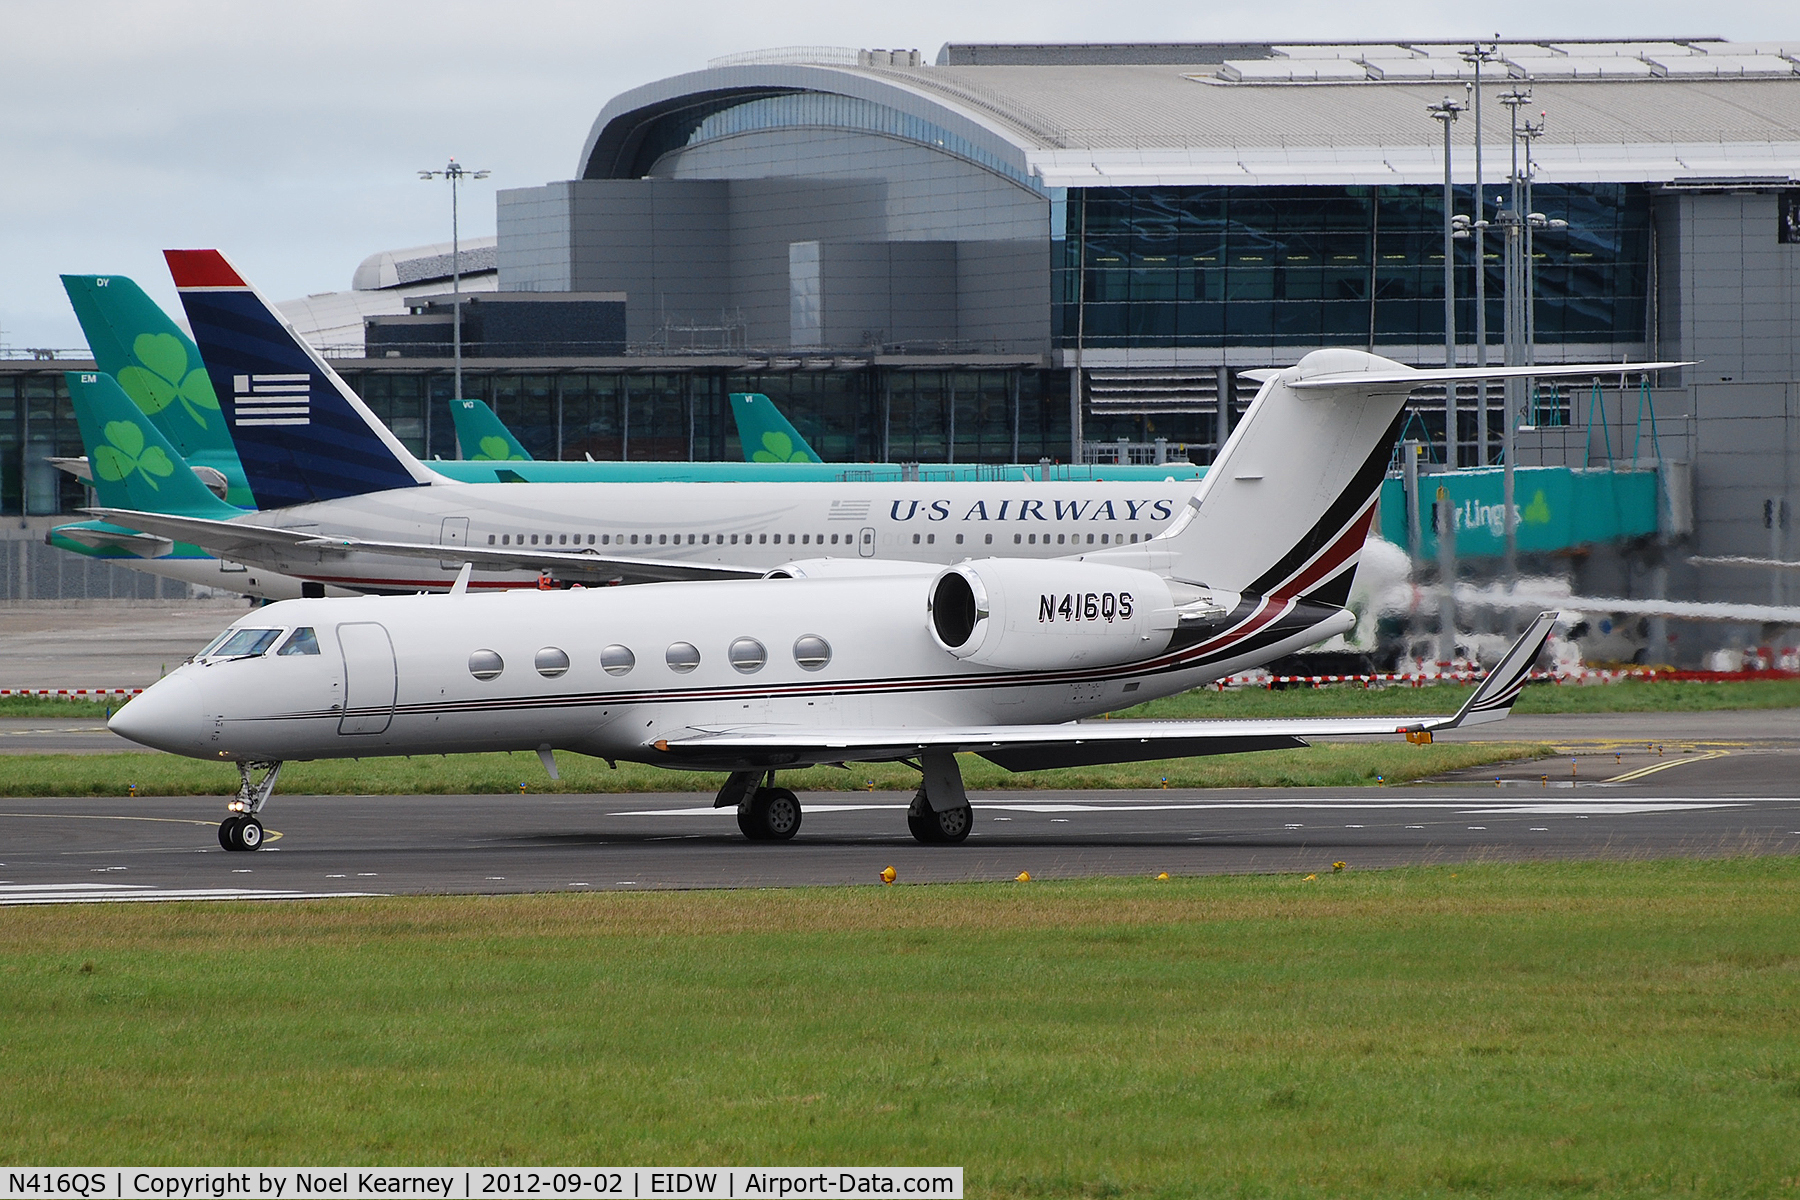 N416QS, 1997 Gulfstream Aerospace G-IV C/N 1316, Lined up for departure off Rwy 28 at EIDW.